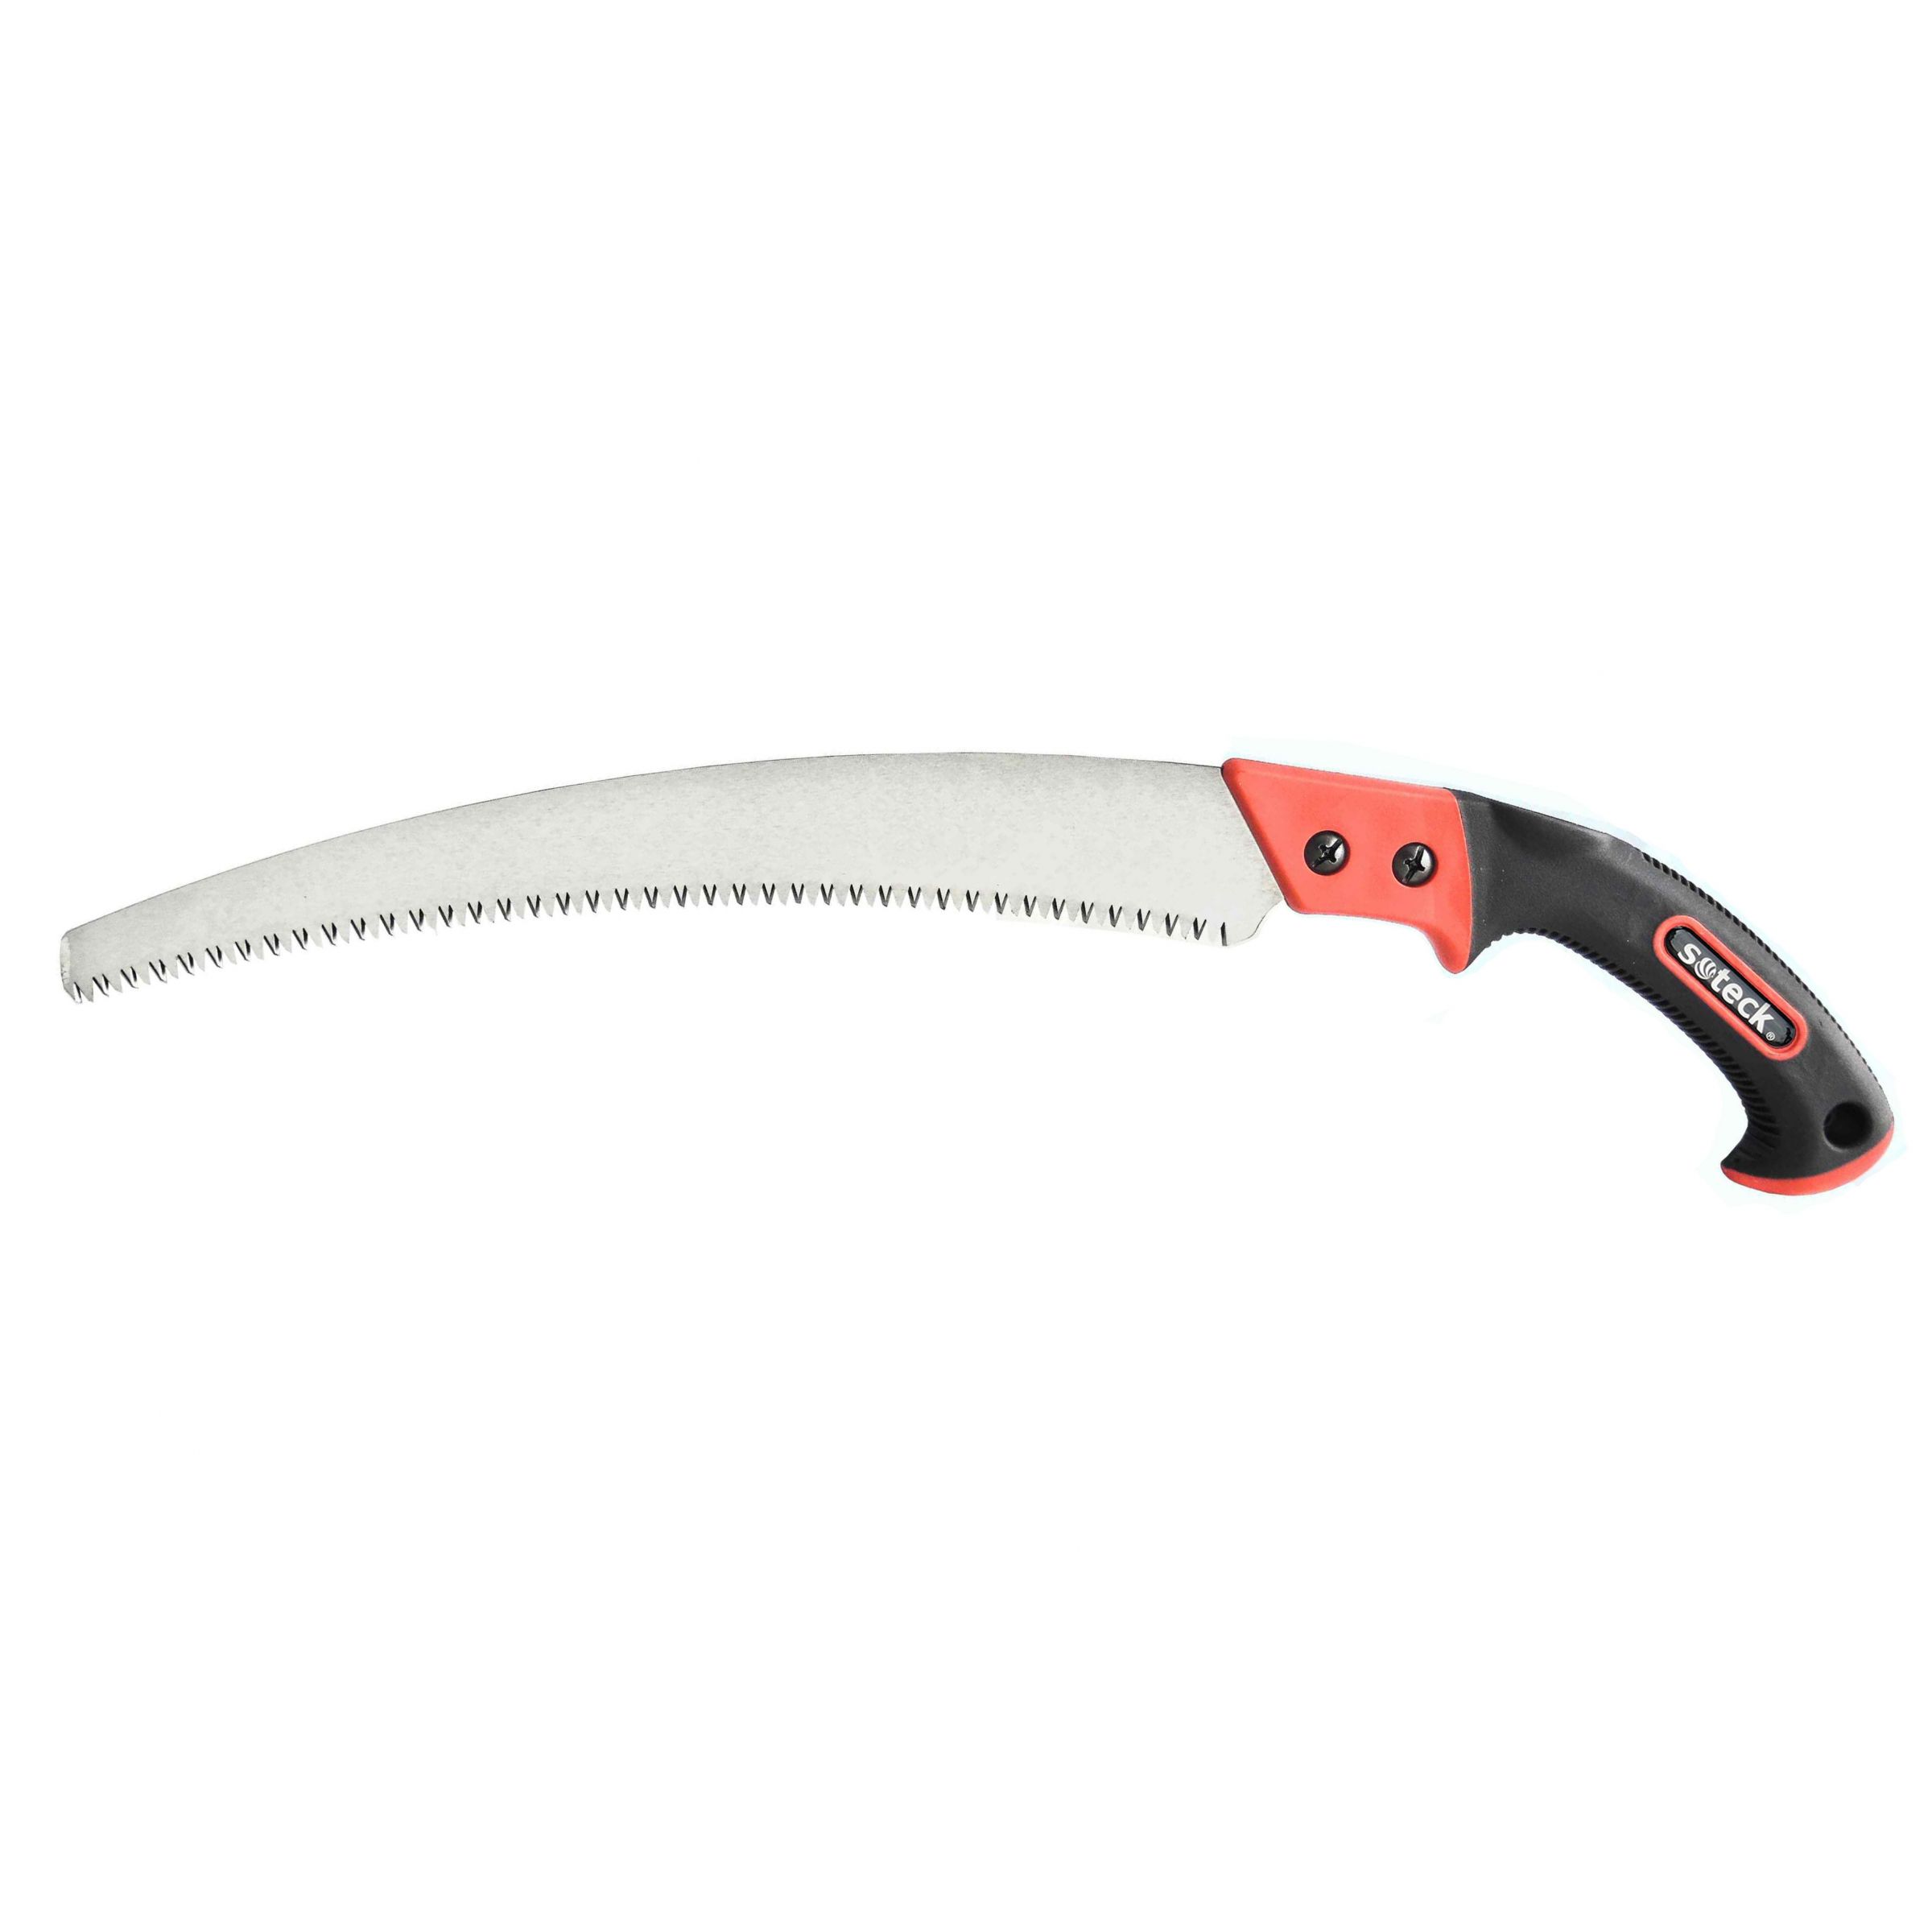 13inch (330mm) Curved Pruning Saw with Bi-Material Handle | Hand Saws